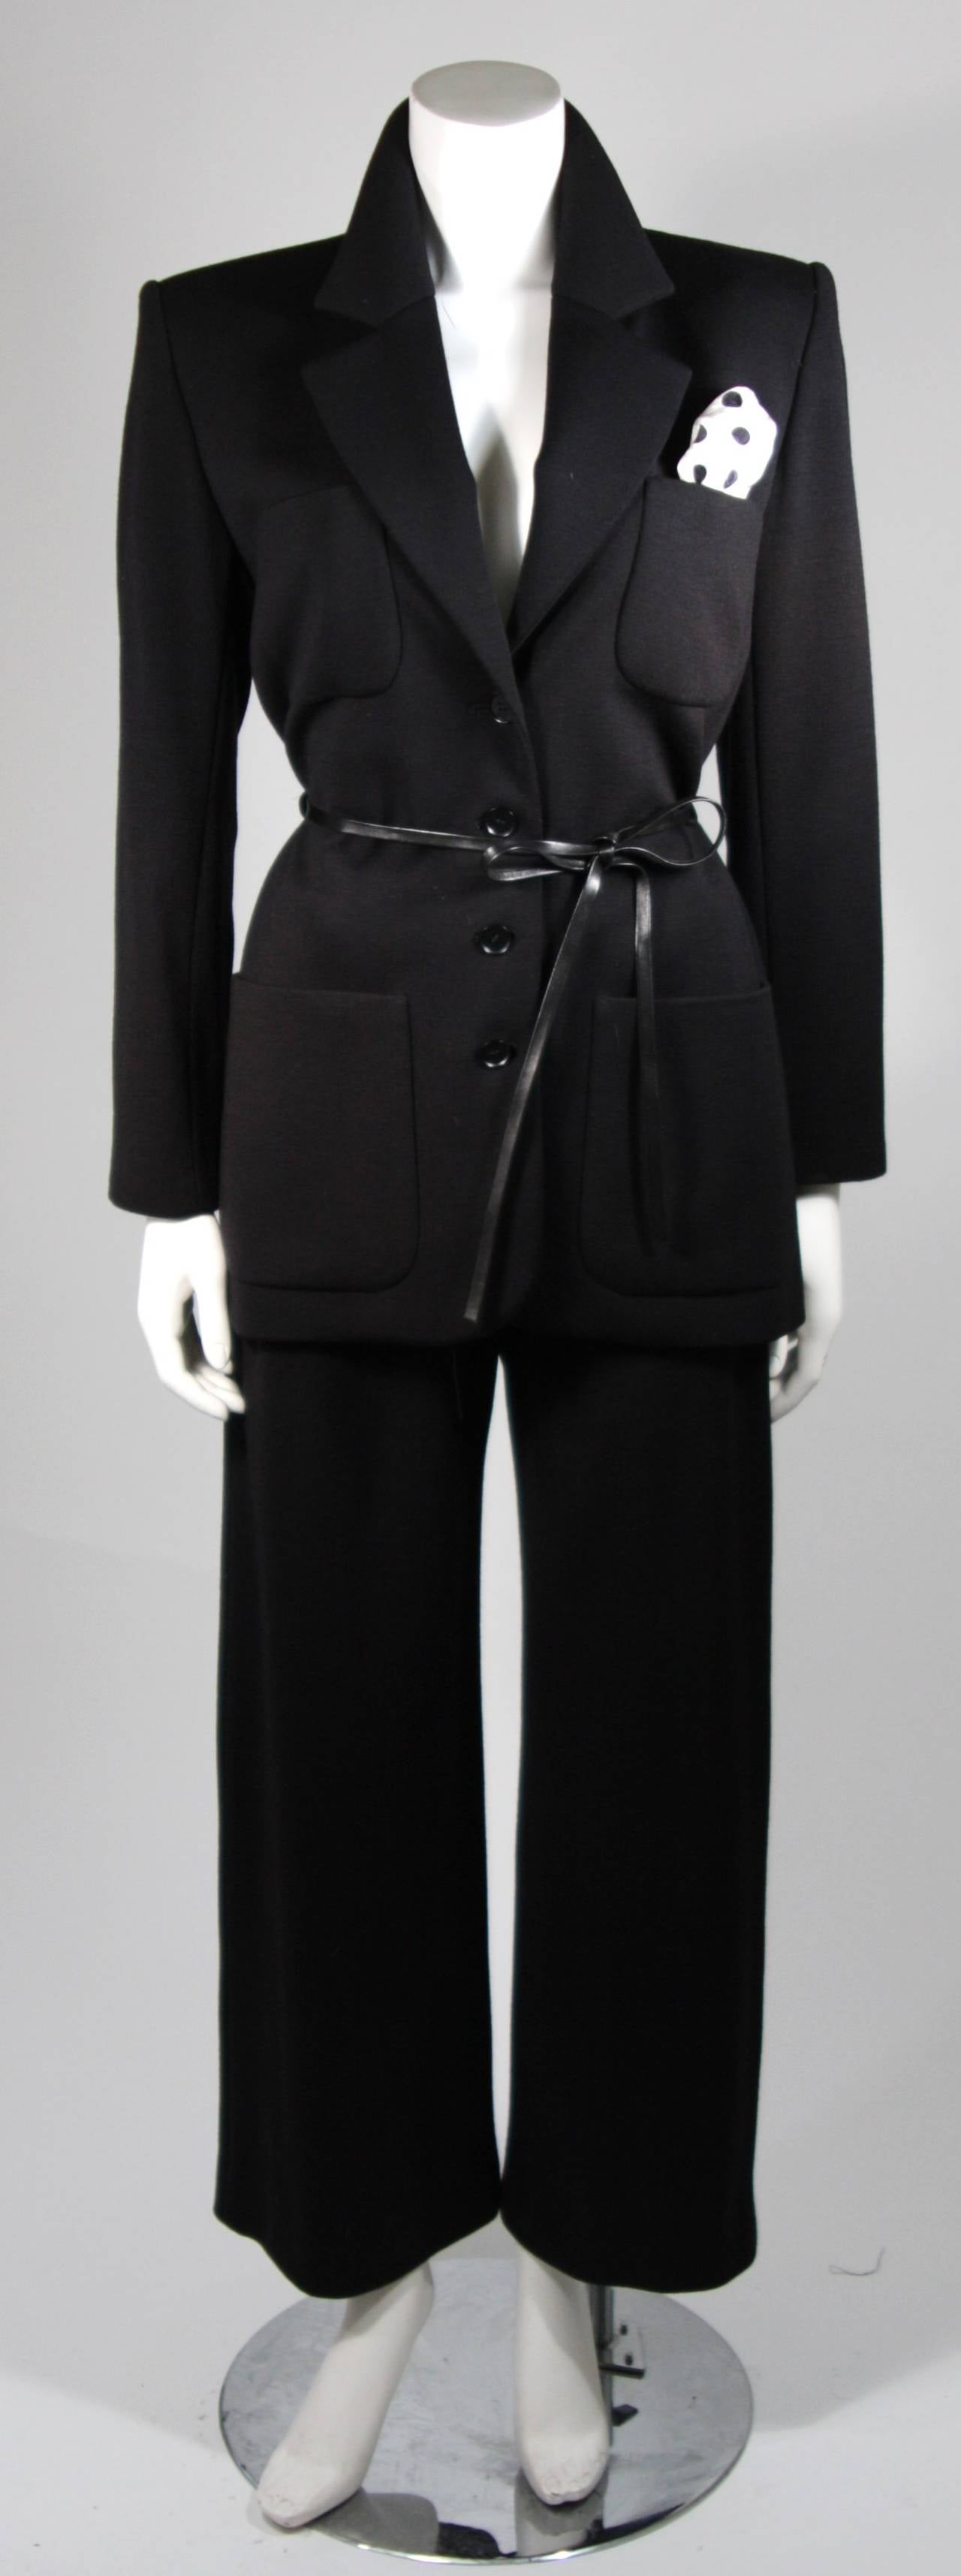 This Yves Saint Laurent design is available for viewing at our Beverly Hills Boutique. We offer a large selection of evening gowns and luxury garments.

This pantsuit ensemble is composed of a black wool blend. The set features leather accents as